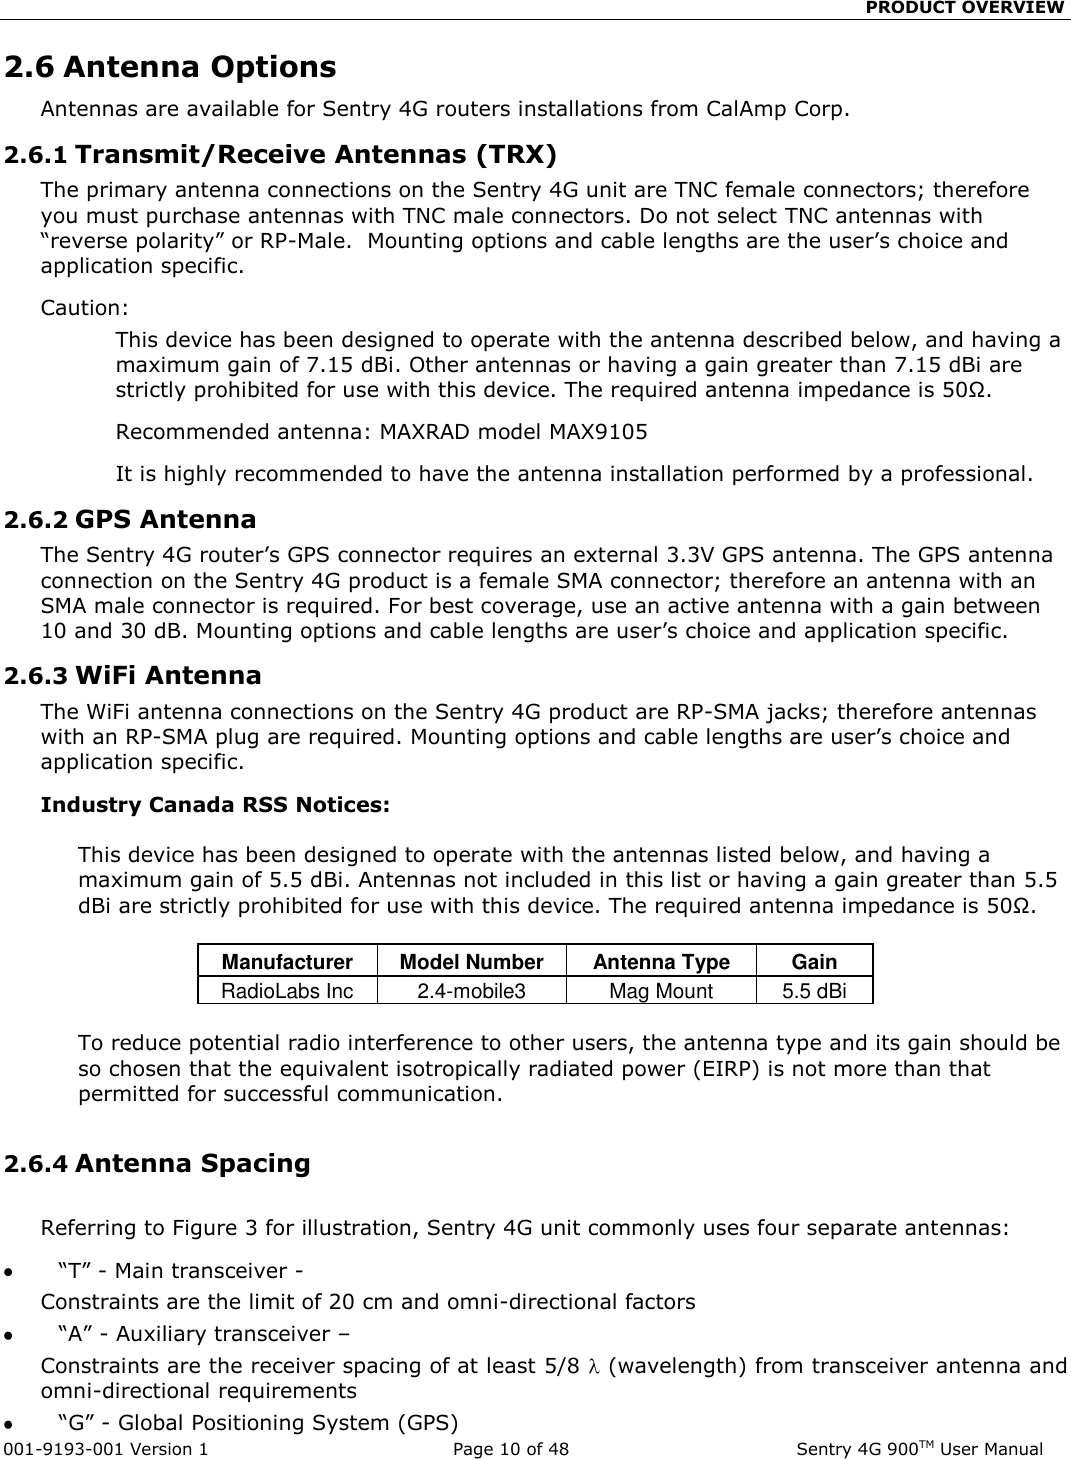                                                 PRODUCT OVERVIEW  001-9193-001 Version 1              Page 10 of 48               Sentry 4G 900TM User Manual 2.6 Antenna Options Antennas are available for Sentry 4G routers installations from CalAmp Corp.  2.6.1 Transmit/Receive Antennas (TRX) The primary antenna connections on the Sentry 4G unit are TNC female connectors; therefore you must purchase antennas with TNC male connectors. Do not select TNC antennas with “reverse polarity” or RP-Male.  Mounting options and cable lengths are the user’s choice and application specific.   Caution: This device has been designed to operate with the antenna described below, and having a maximum gain of 7.15 dBi. Other antennas or having a gain greater than 7.15 dBi are strictly prohibited for use with this device. The required antenna impedance is 50Ω. Recommended antenna: MAXRAD model MAX9105 It is highly recommended to have the antenna installation performed by a professional. 2.6.2 GPS Antenna The Sentry 4G router’s GPS connector requires an external 3.3V GPS antenna. The GPS antenna connection on the Sentry 4G product is a female SMA connector; therefore an antenna with an SMA male connector is required. For best coverage, use an active antenna with a gain between 10 and 30 dB. Mounting options and cable lengths are user’s choice and application specific. 2.6.3 WiFi Antenna The WiFi antenna connections on the Sentry 4G product are RP-SMA jacks; therefore antennas with an RP-SMA plug are required. Mounting options and cable lengths are user’s choice and application specific. Industry Canada RSS Notices:   This device has been designed to operate with the antennas listed below, and having a maximum gain of 5.5 dBi. Antennas not included in this list or having a gain greater than 5.5 dBi are strictly prohibited for use with this device. The required antenna impedance is 50Ω.  Manufacturer Model Number Antenna Type  Gain RadioLabs Inc 2.4-mobile3 Mag Mount 5.5 dBi  To reduce potential radio interference to other users, the antenna type and its gain should be so chosen that the equivalent isotropically radiated power (EIRP) is not more than that permitted for successful communication.  2.6.4 Antenna Spacing  Referring to Figure 3 for illustration, Sentry 4G unit commonly uses four separate antennas:          “T” - Main transceiver -  Constraints are the limit of 20 cm and omni-directional factors           “A” - Auxiliary transceiver –  Constraints are the receiver spacing of at least 5/8   (wavelength) from transceiver antenna and omni-directional requirements           “G” - Global Positioning System (GPS) 